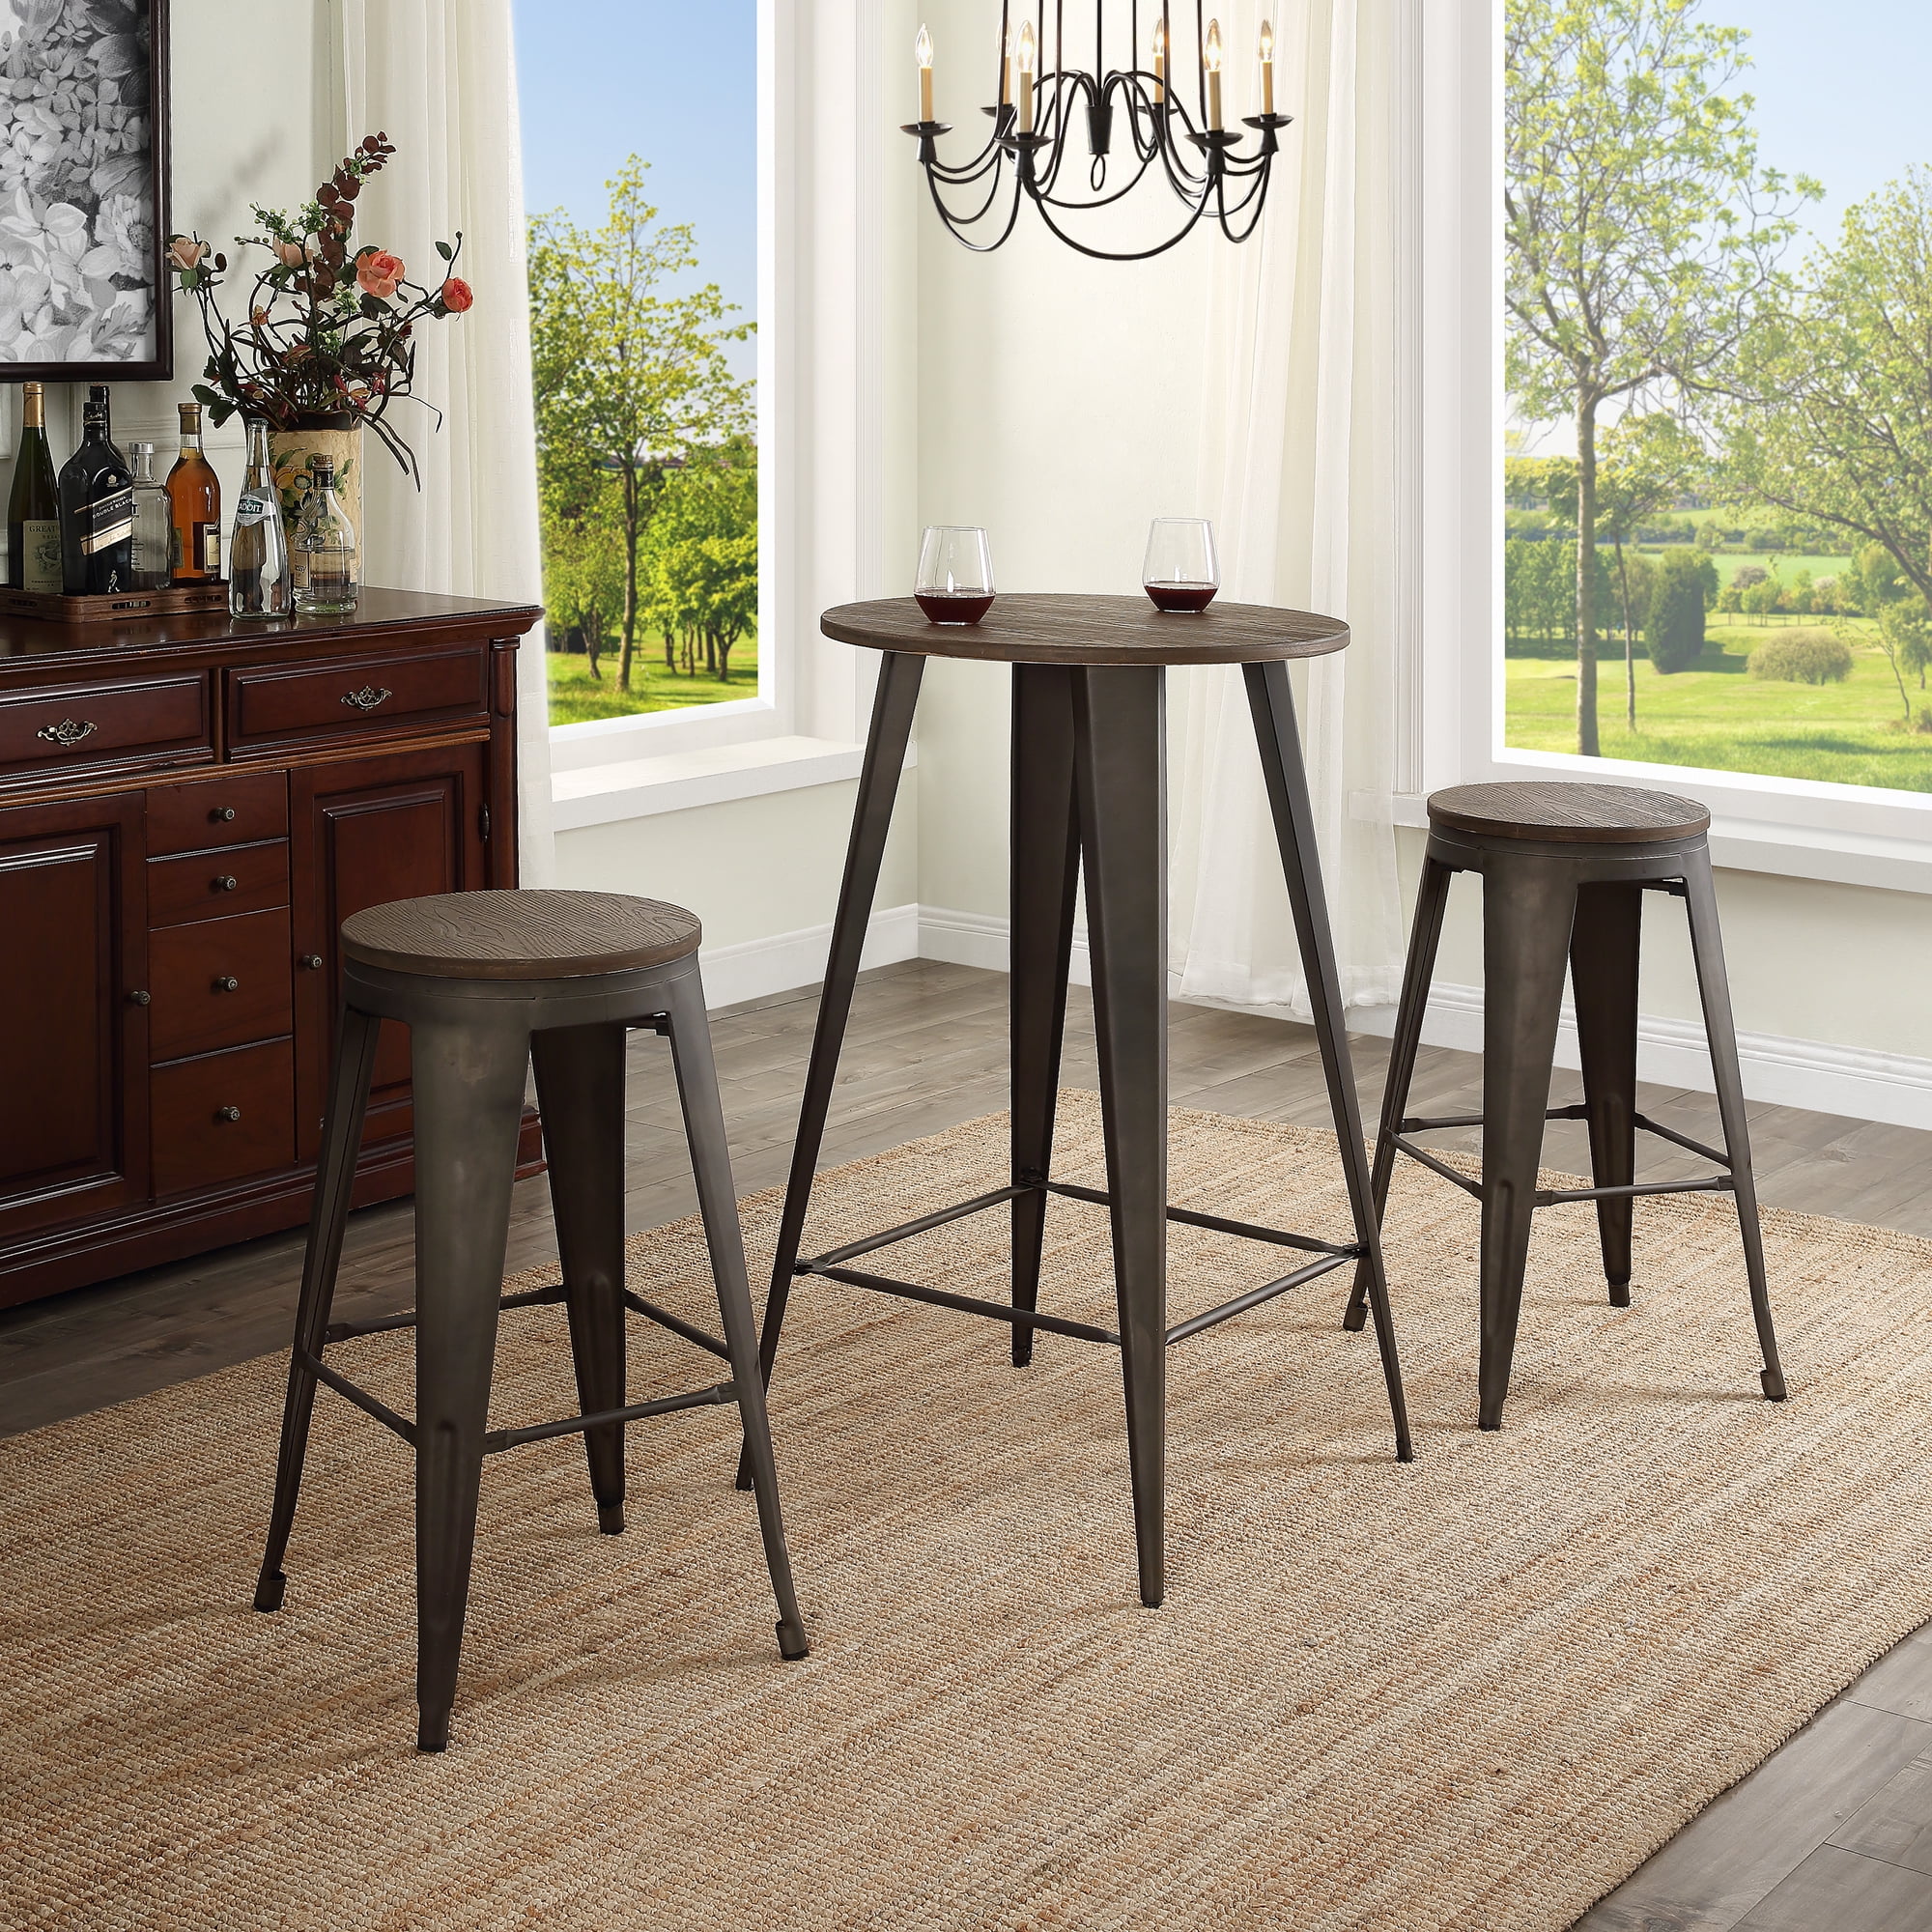 Featured image of post Nautical Bar Stools - Shop target for nautical, coastal and beach bar stools &amp; counter you will love at great low prices.